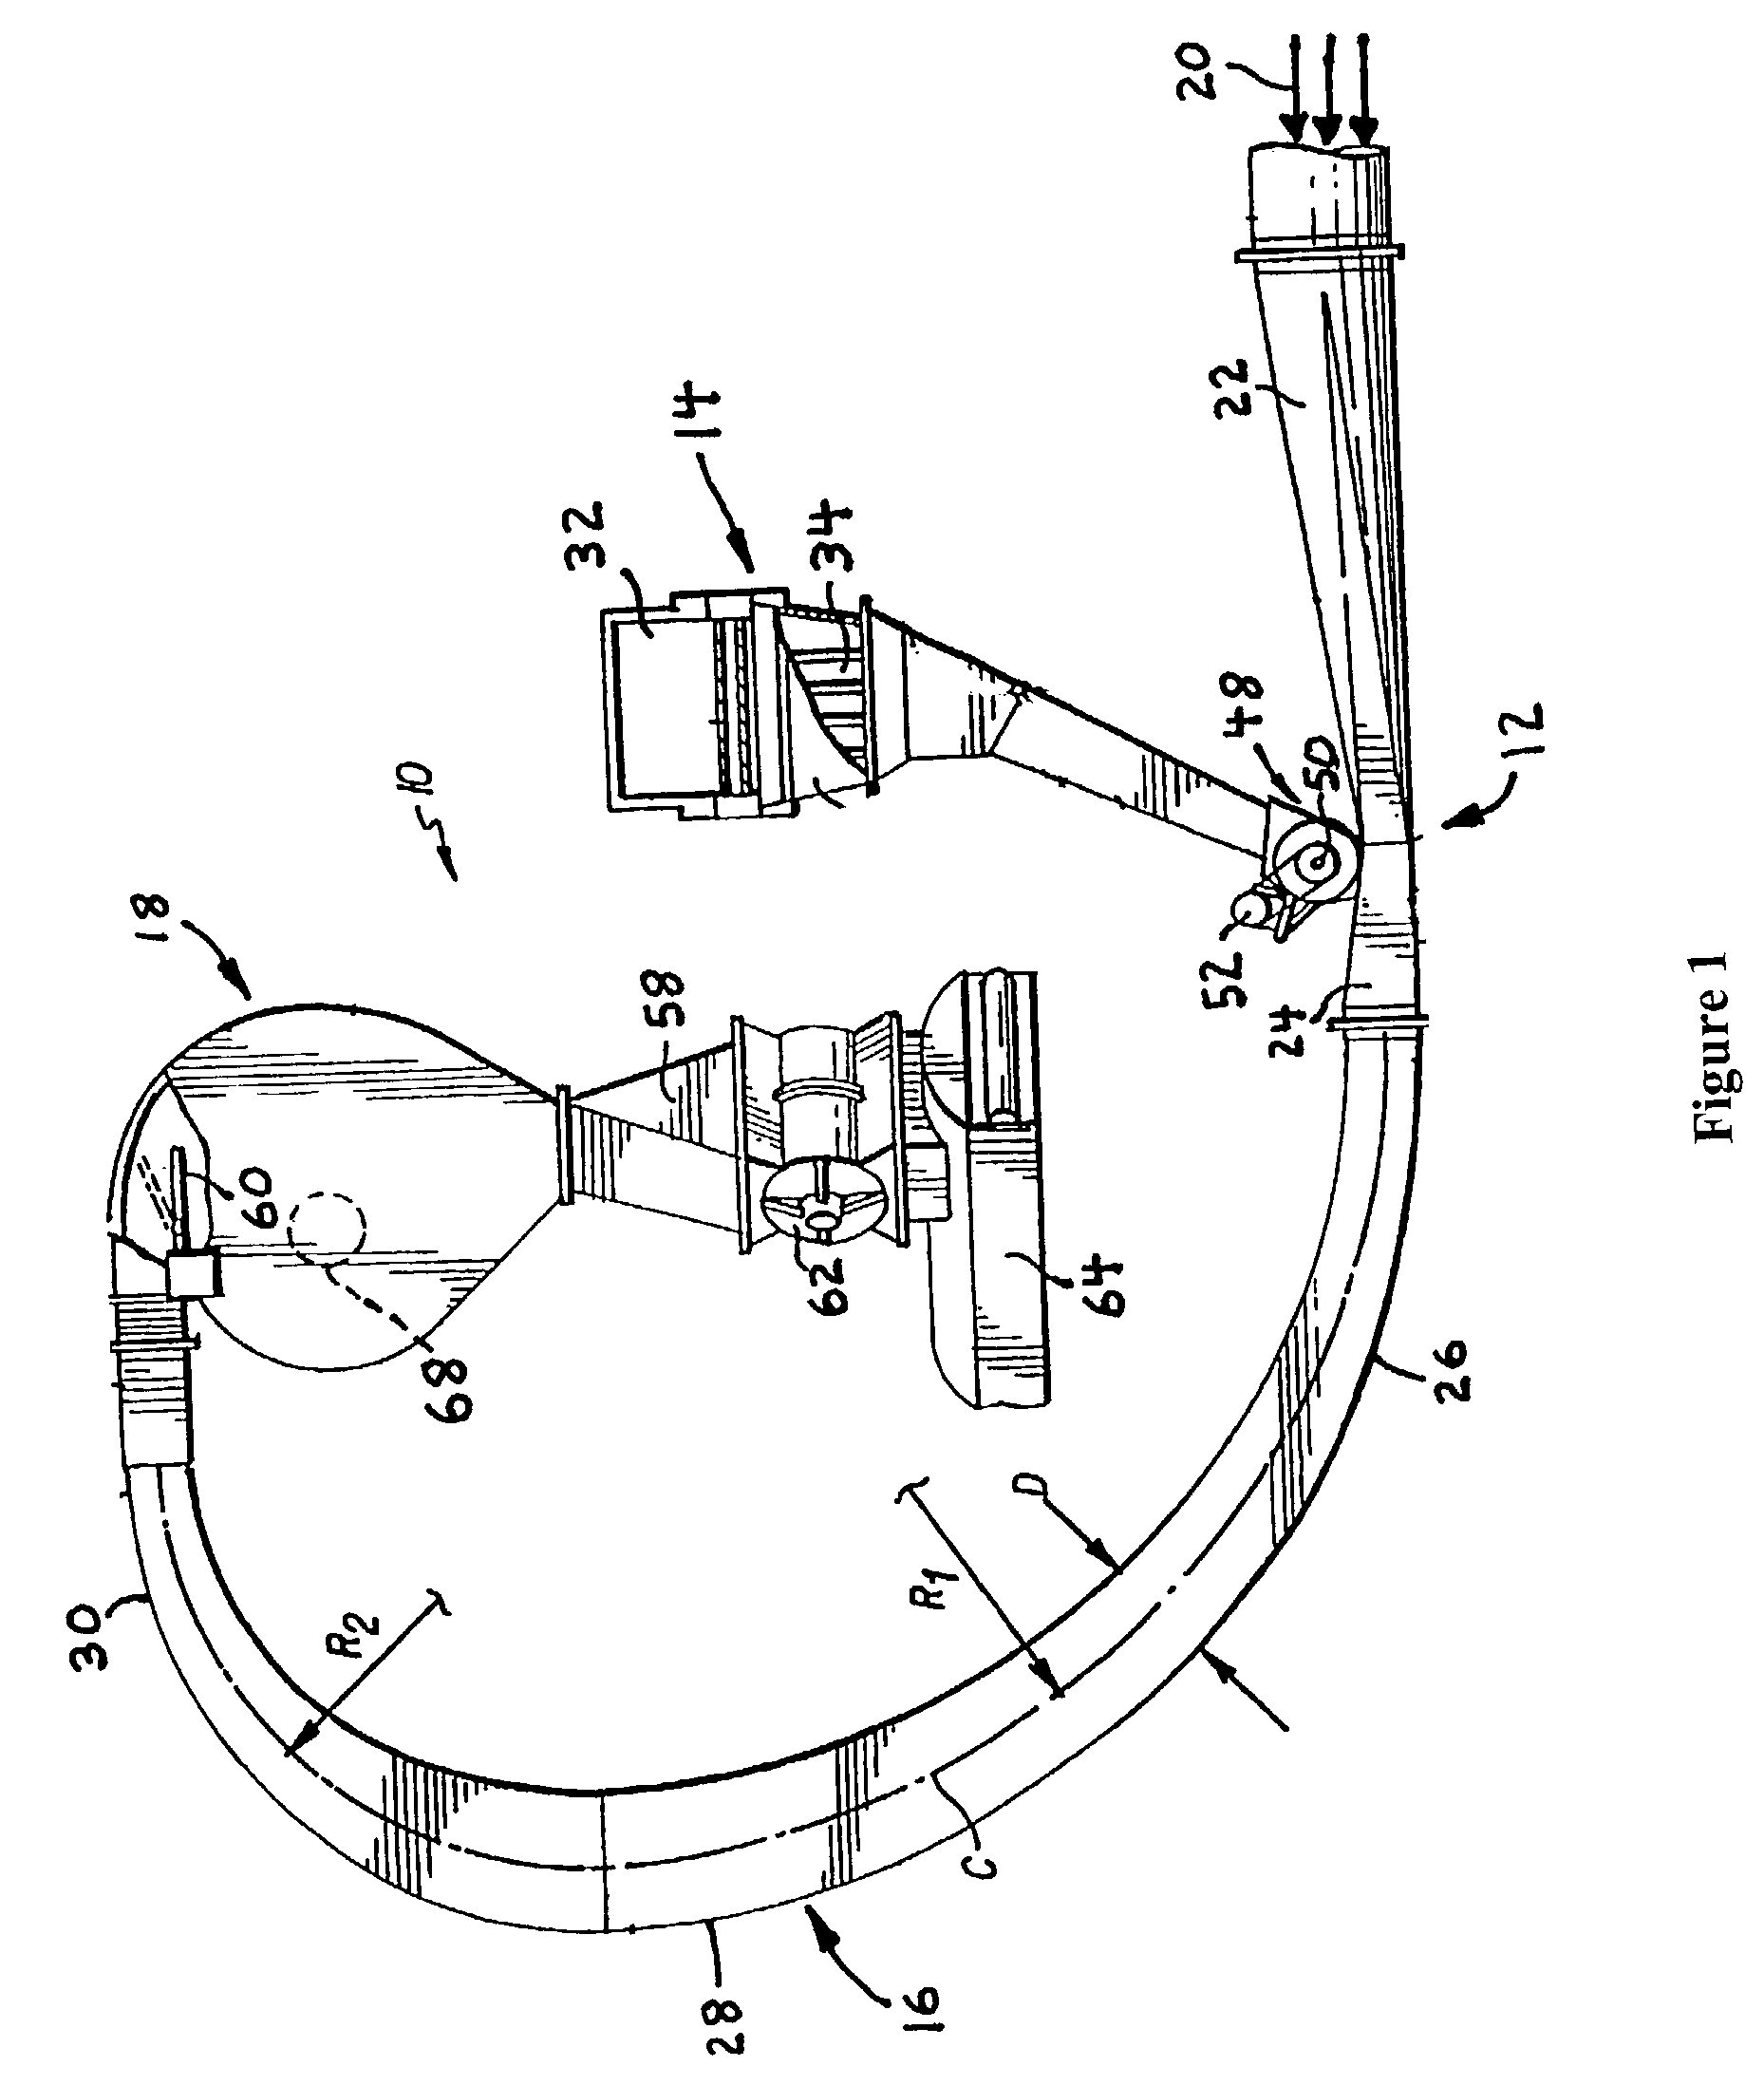 Method of expanding tobacco using steam